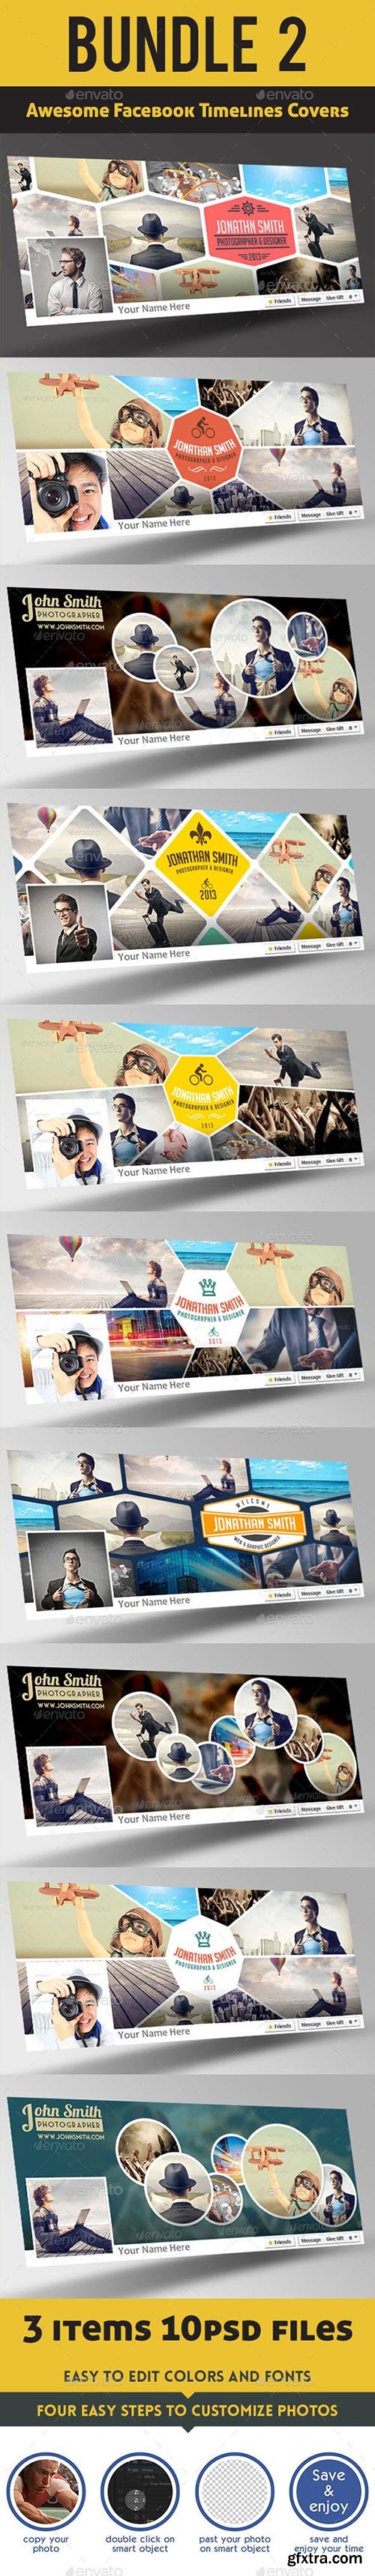 GraphicRiver - The Bundle Facebook Timelines Covers 8970113